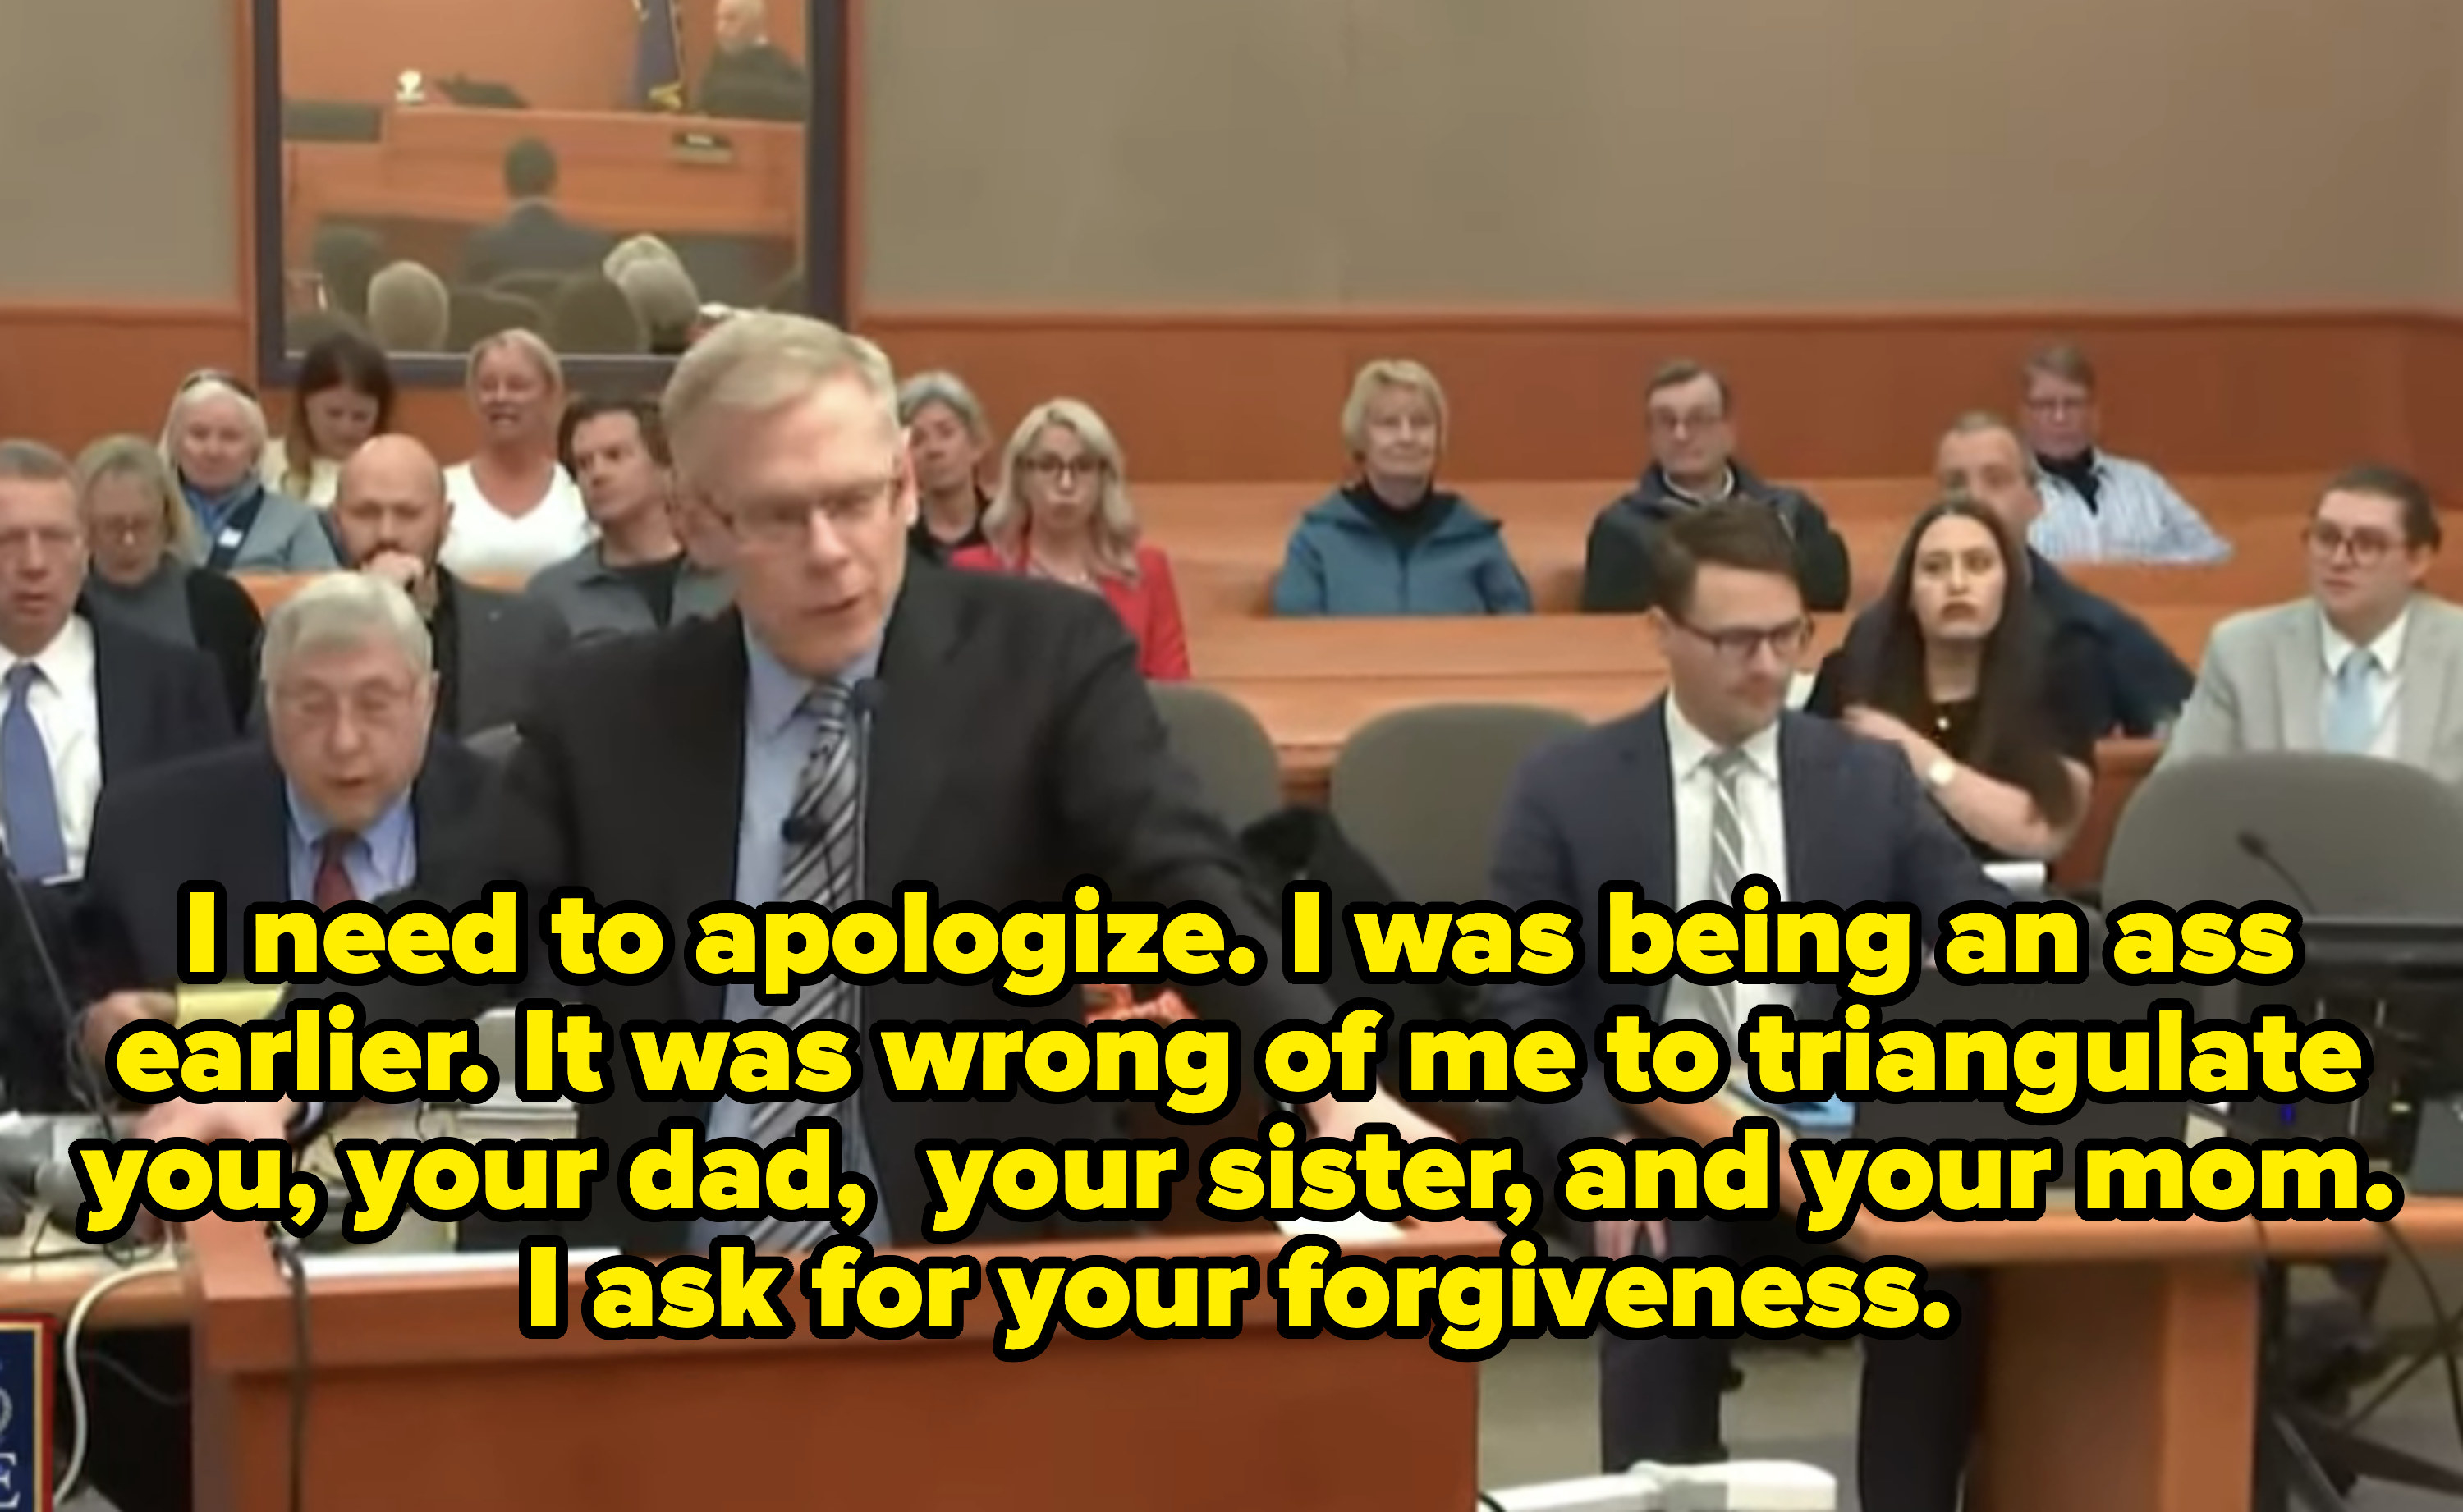 at the stand he says, i need to apologize, i was being an ass earlier. it was wrong of me to triangulate you, your dad, your sister, and your mom. i ask for your forgiveness